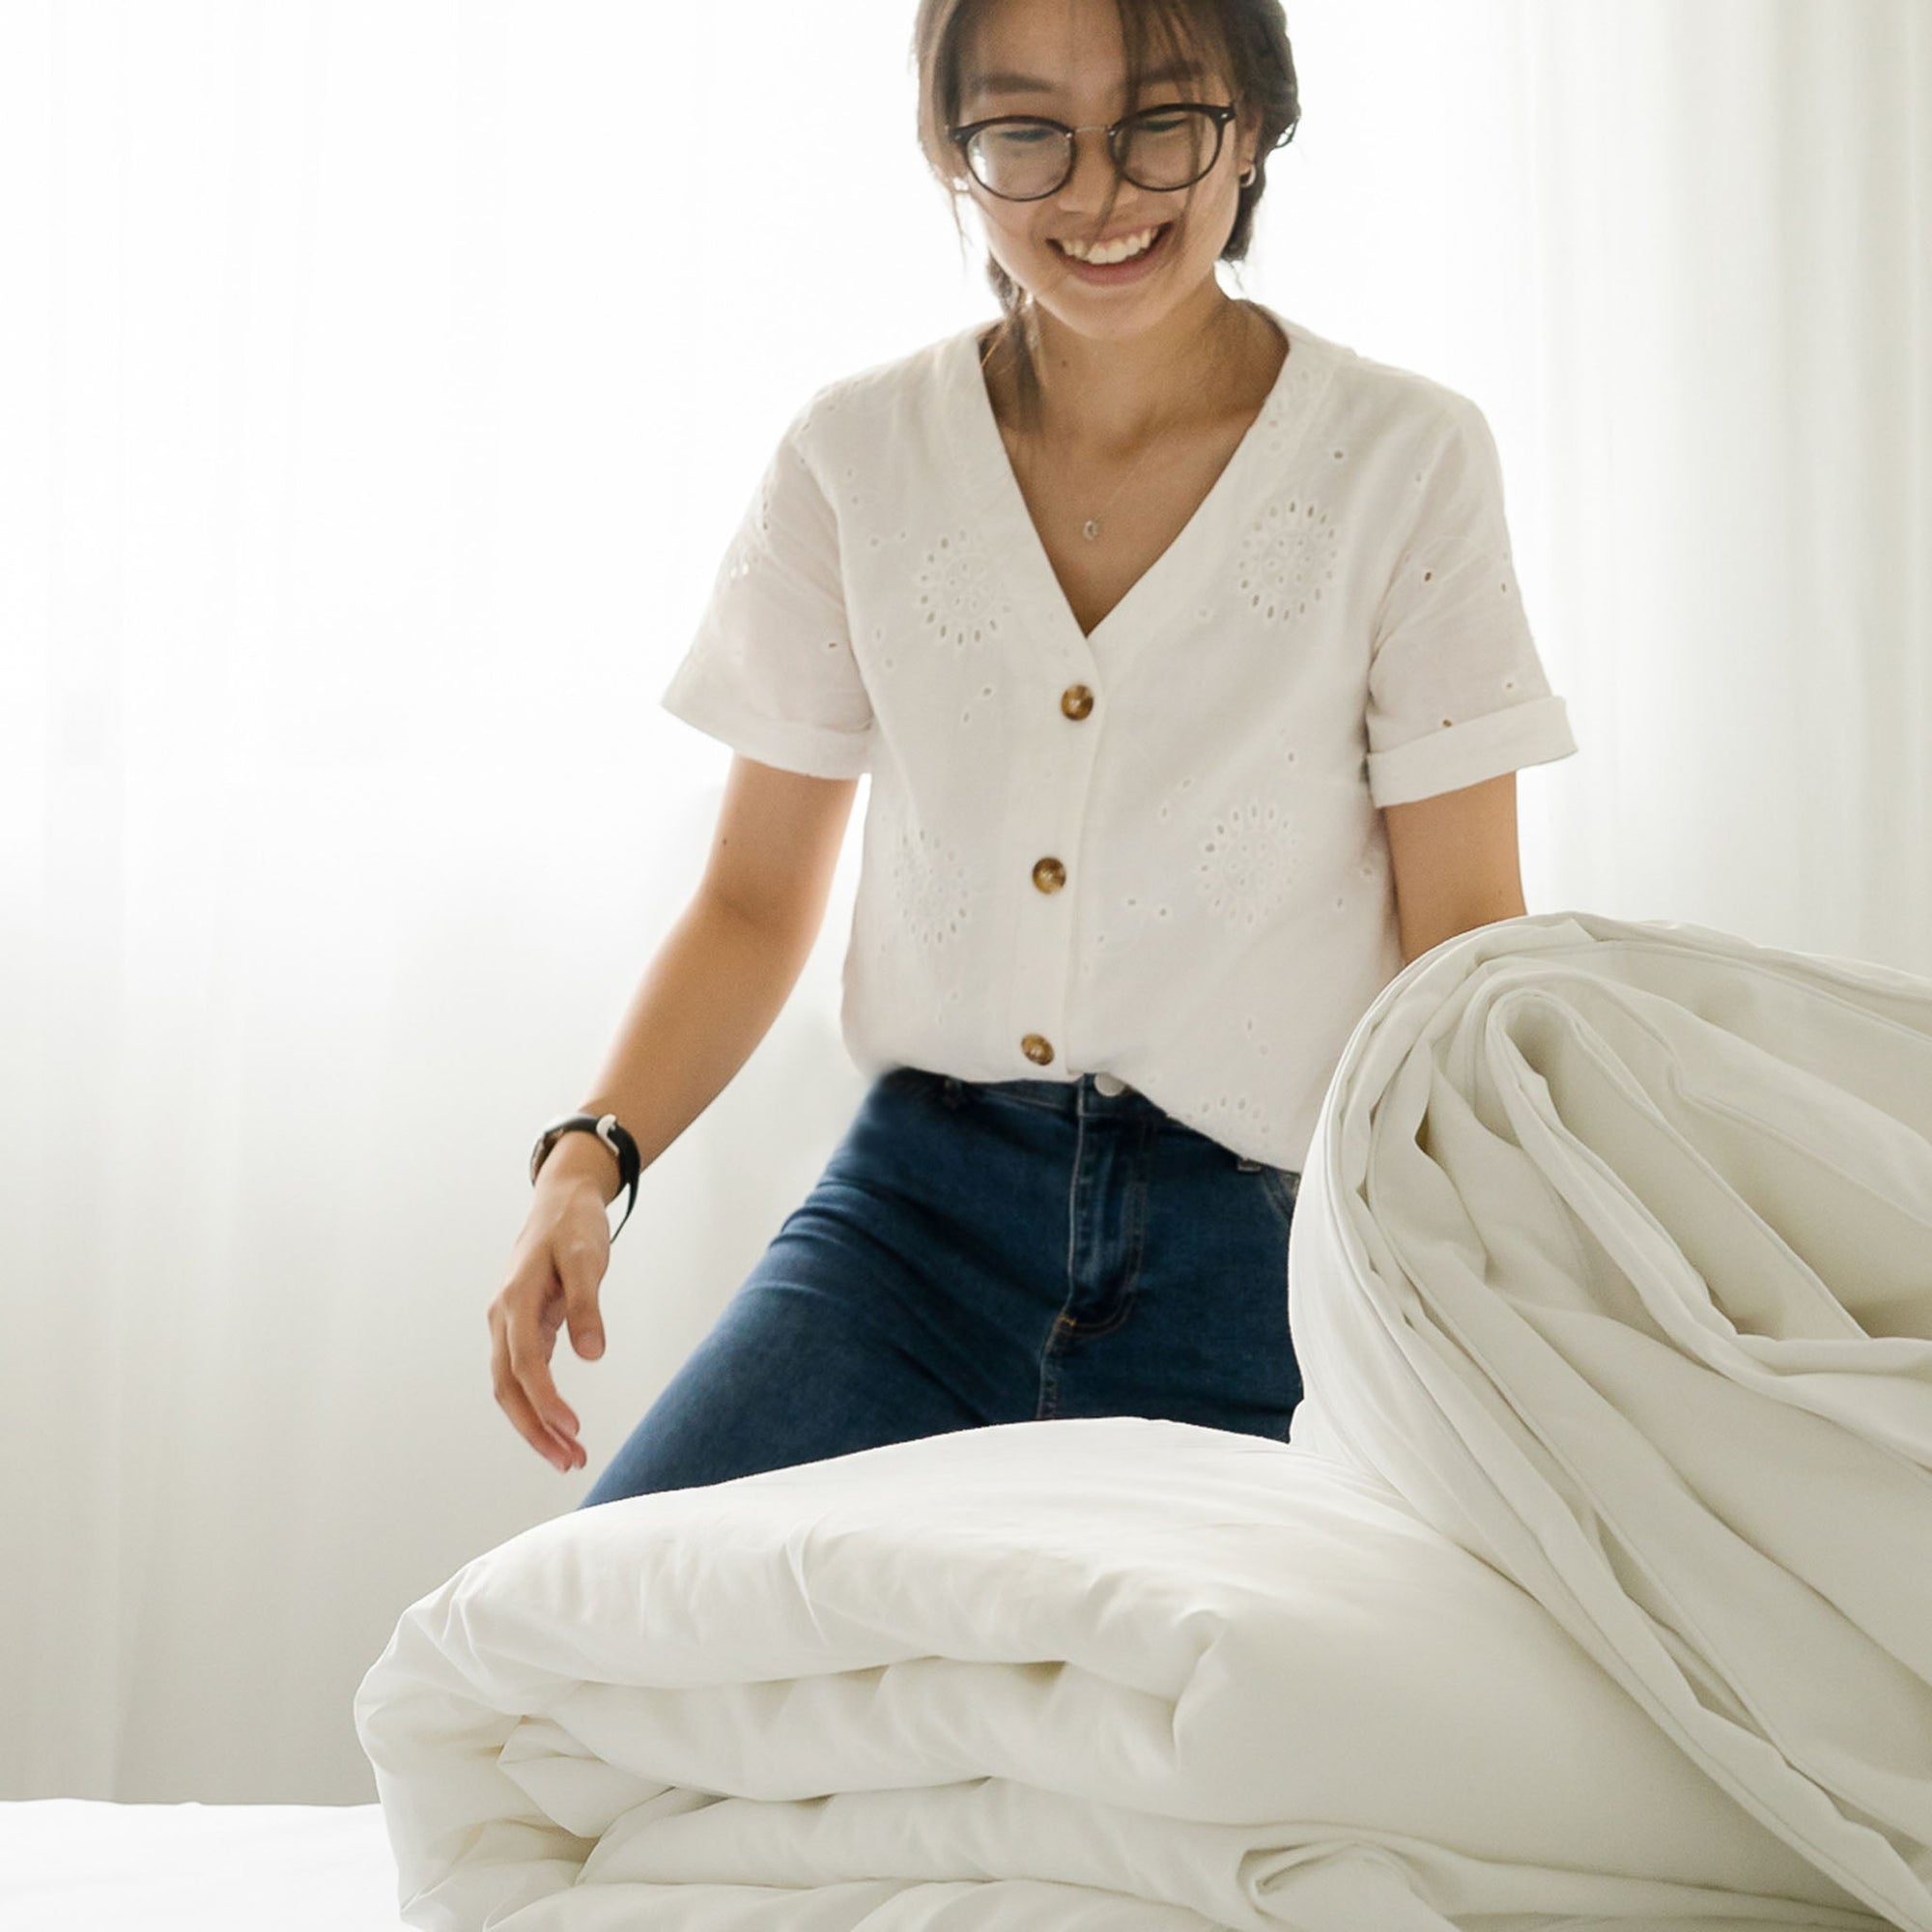 White Cotton Bed Sheets Deluxe Set with Cotton Fitted Sheet, Cotton Pillow Case, Cotton Bolster Case, Cotton Duvet Cover. Buy White Bed Sheets at Weavve Home, Shop Egyptian Cotton Bed Sheets Singapore and Luxury Hotel Sheets. 600 High Thread Count Bed Sheet. 